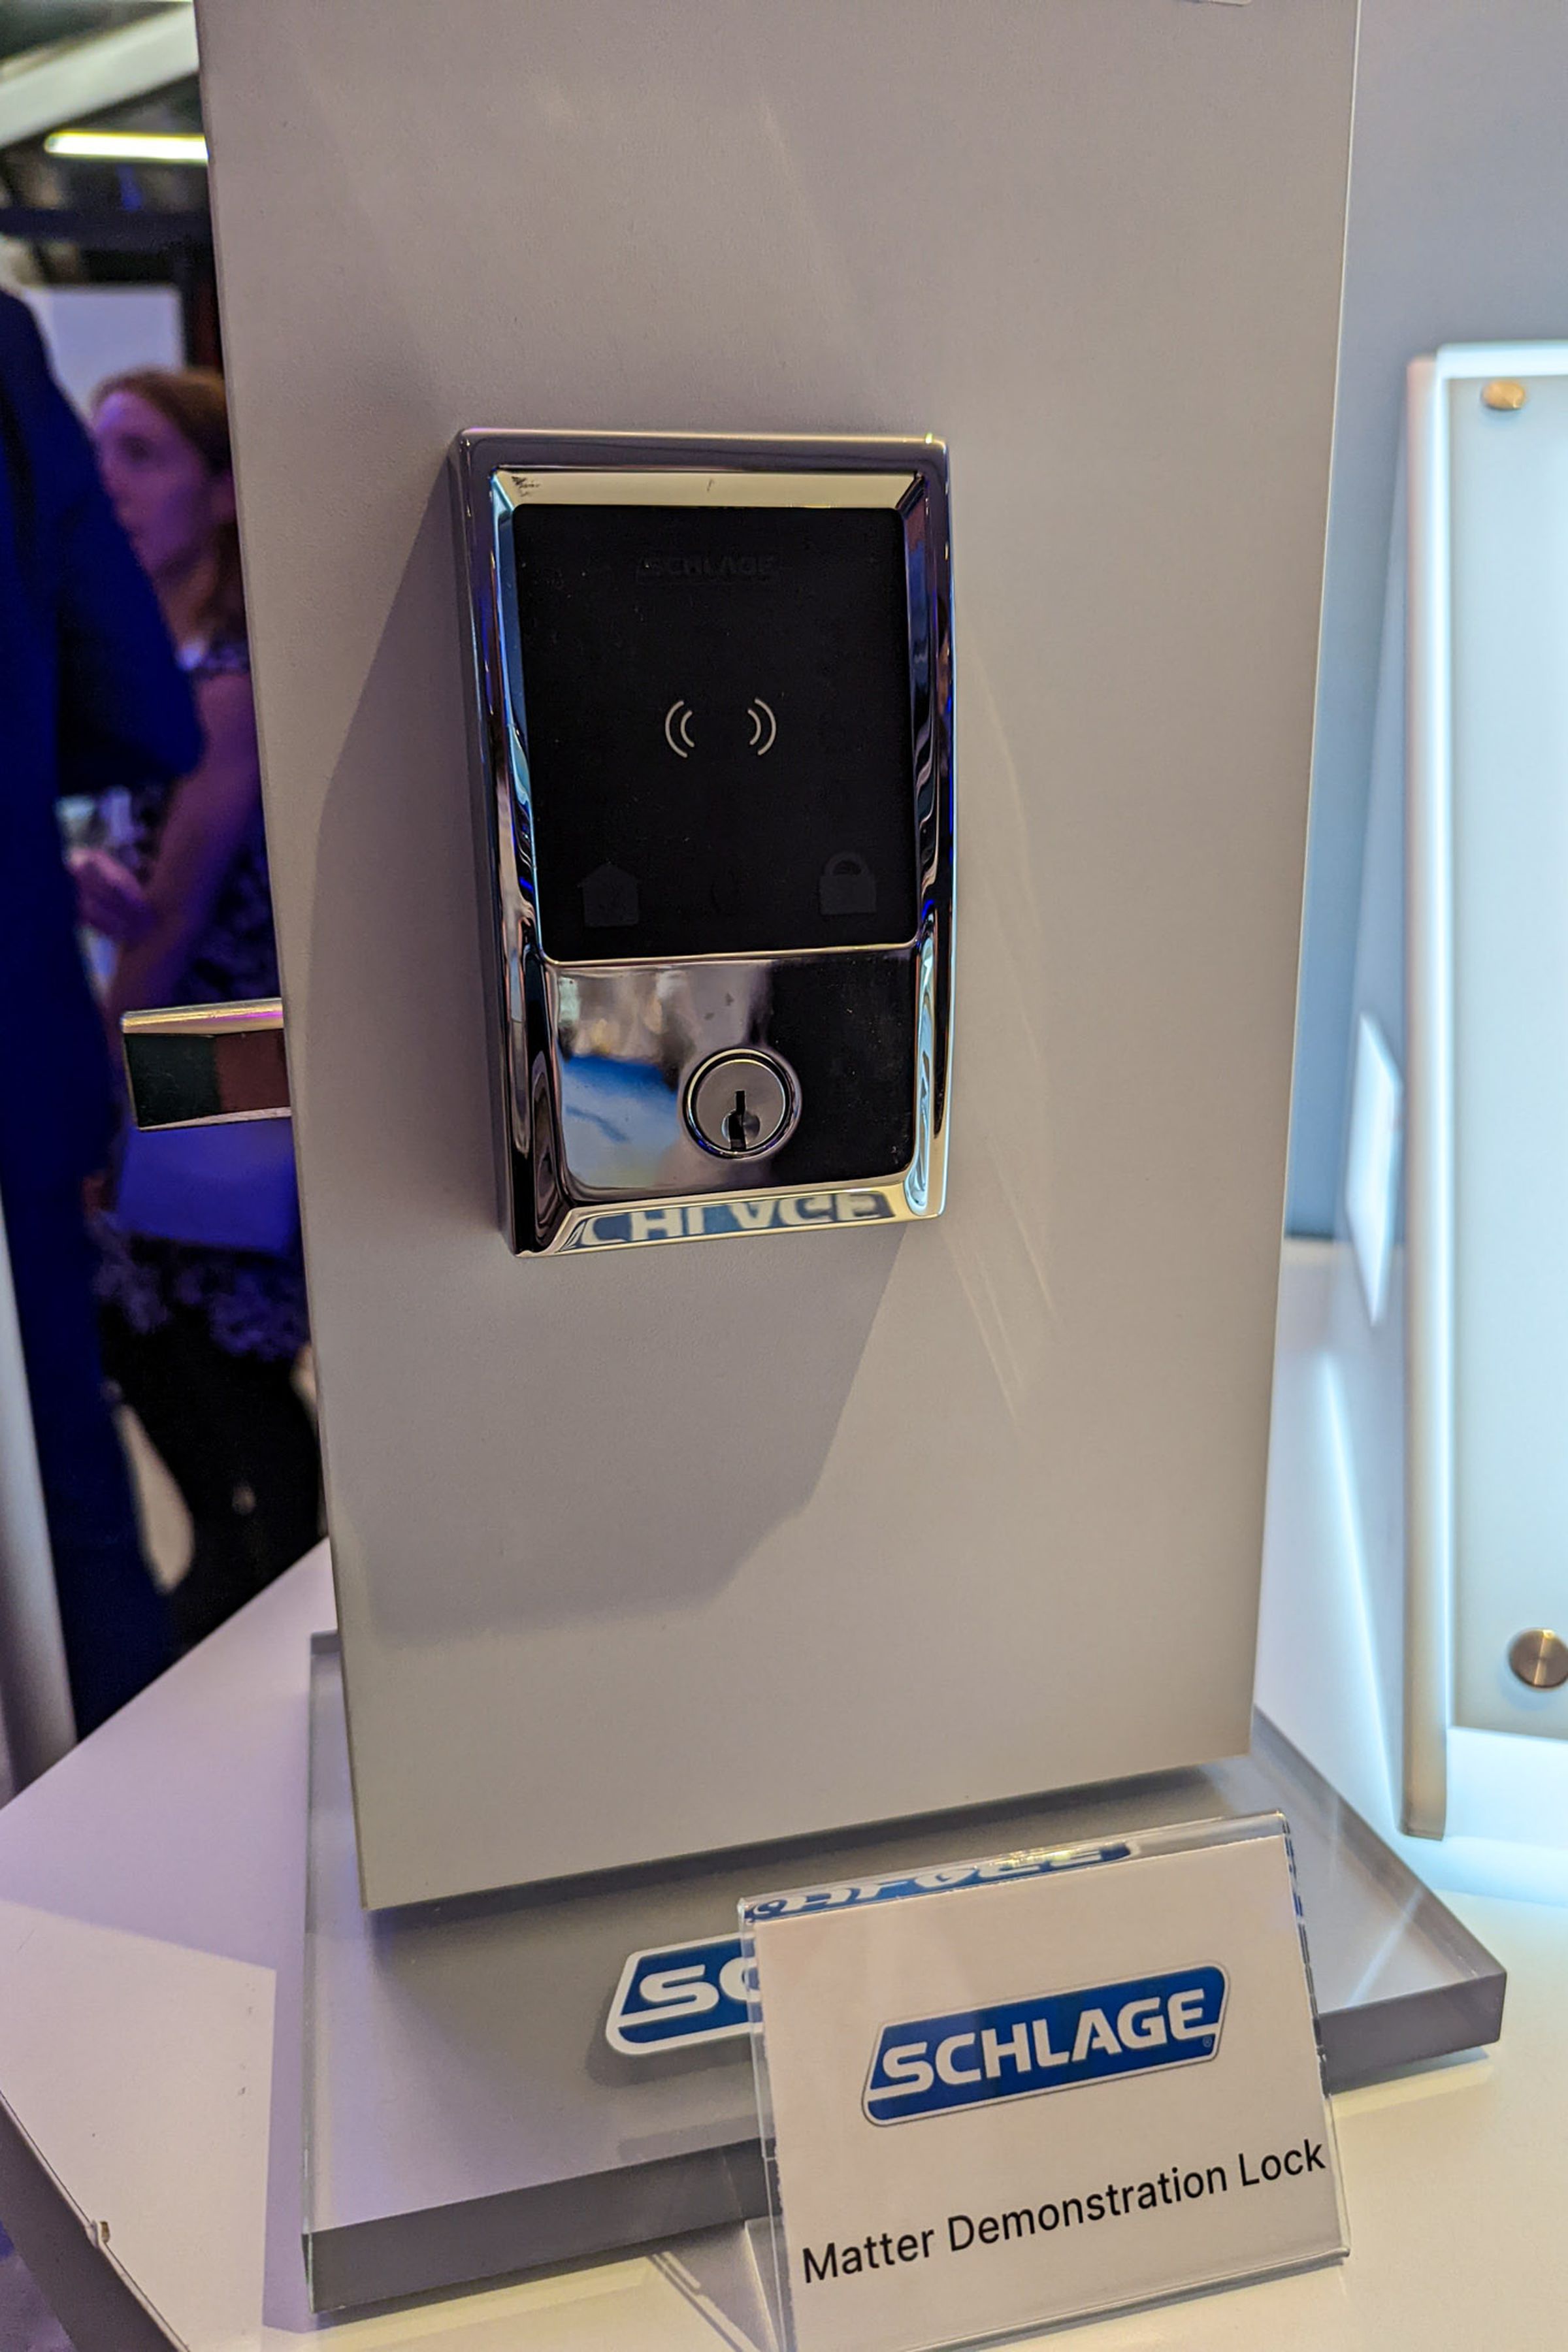 A Matter-enabled Schlage lock was on display at the Matter launch in November, but the company has not released one yet.